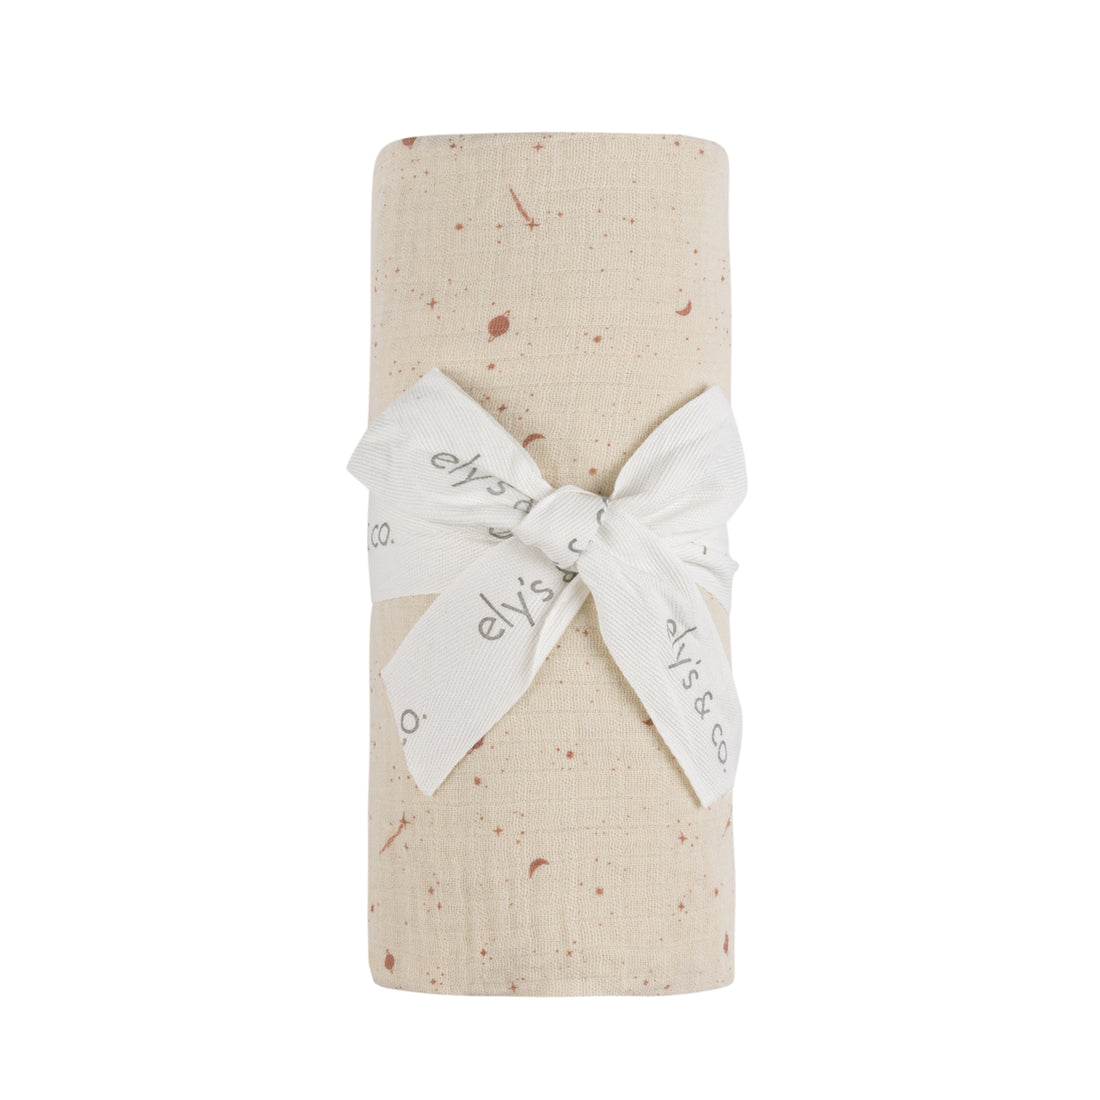 Ely`s & Co Muslin Swaddle - Pink/cream